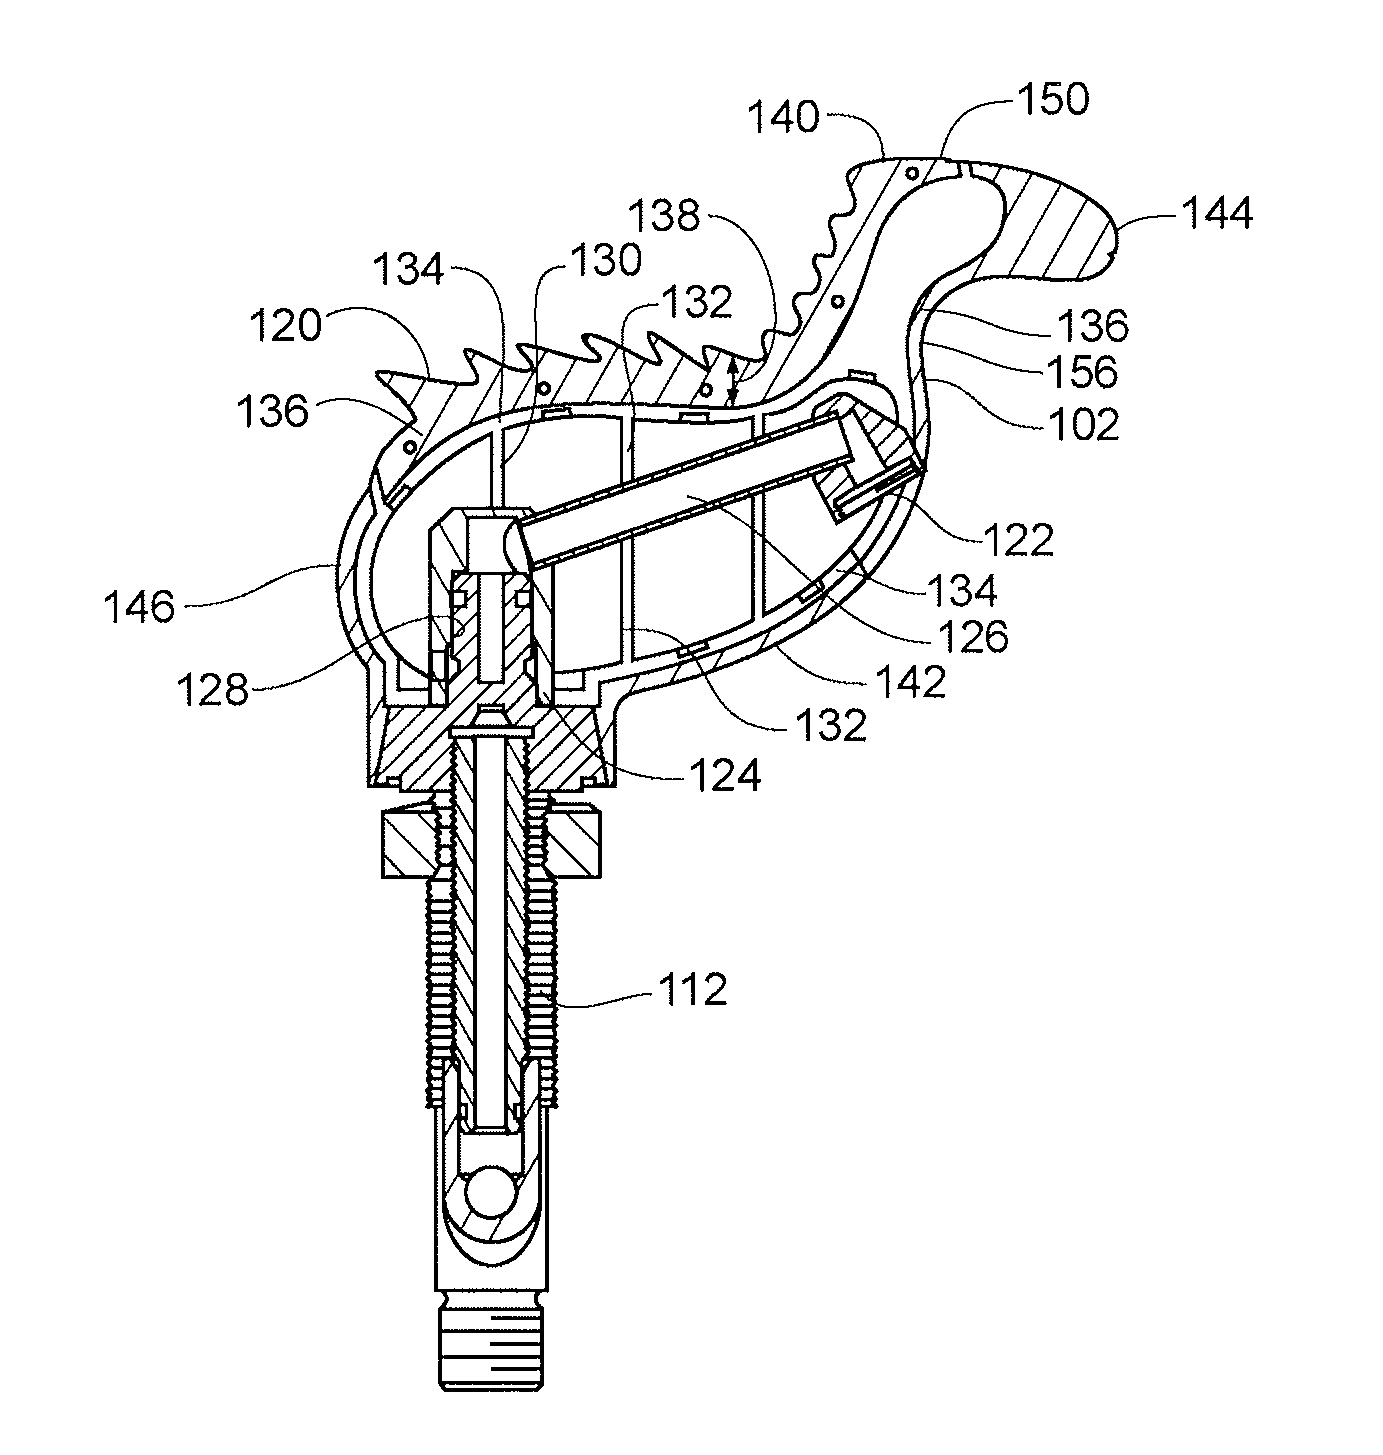 Method and apparatus for soft-feel plumbing fixtures